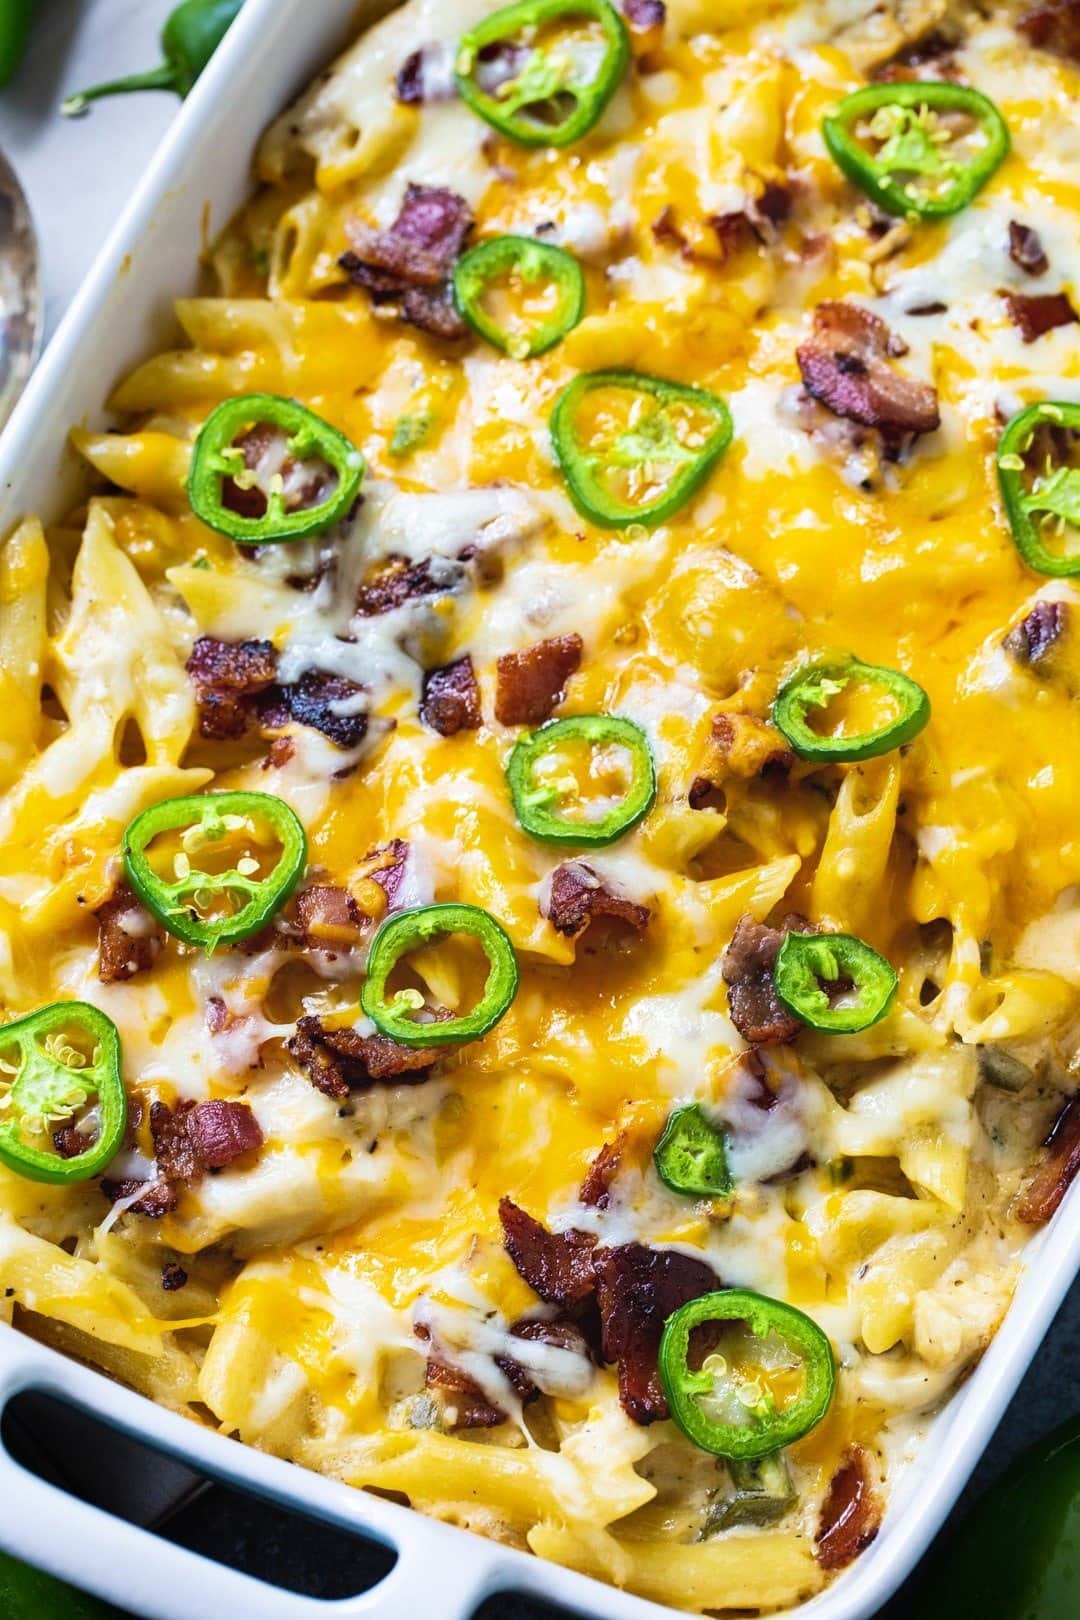 Jalapeno Popper Casserole with Bacons, Onions, Garlic and Cream Cheese